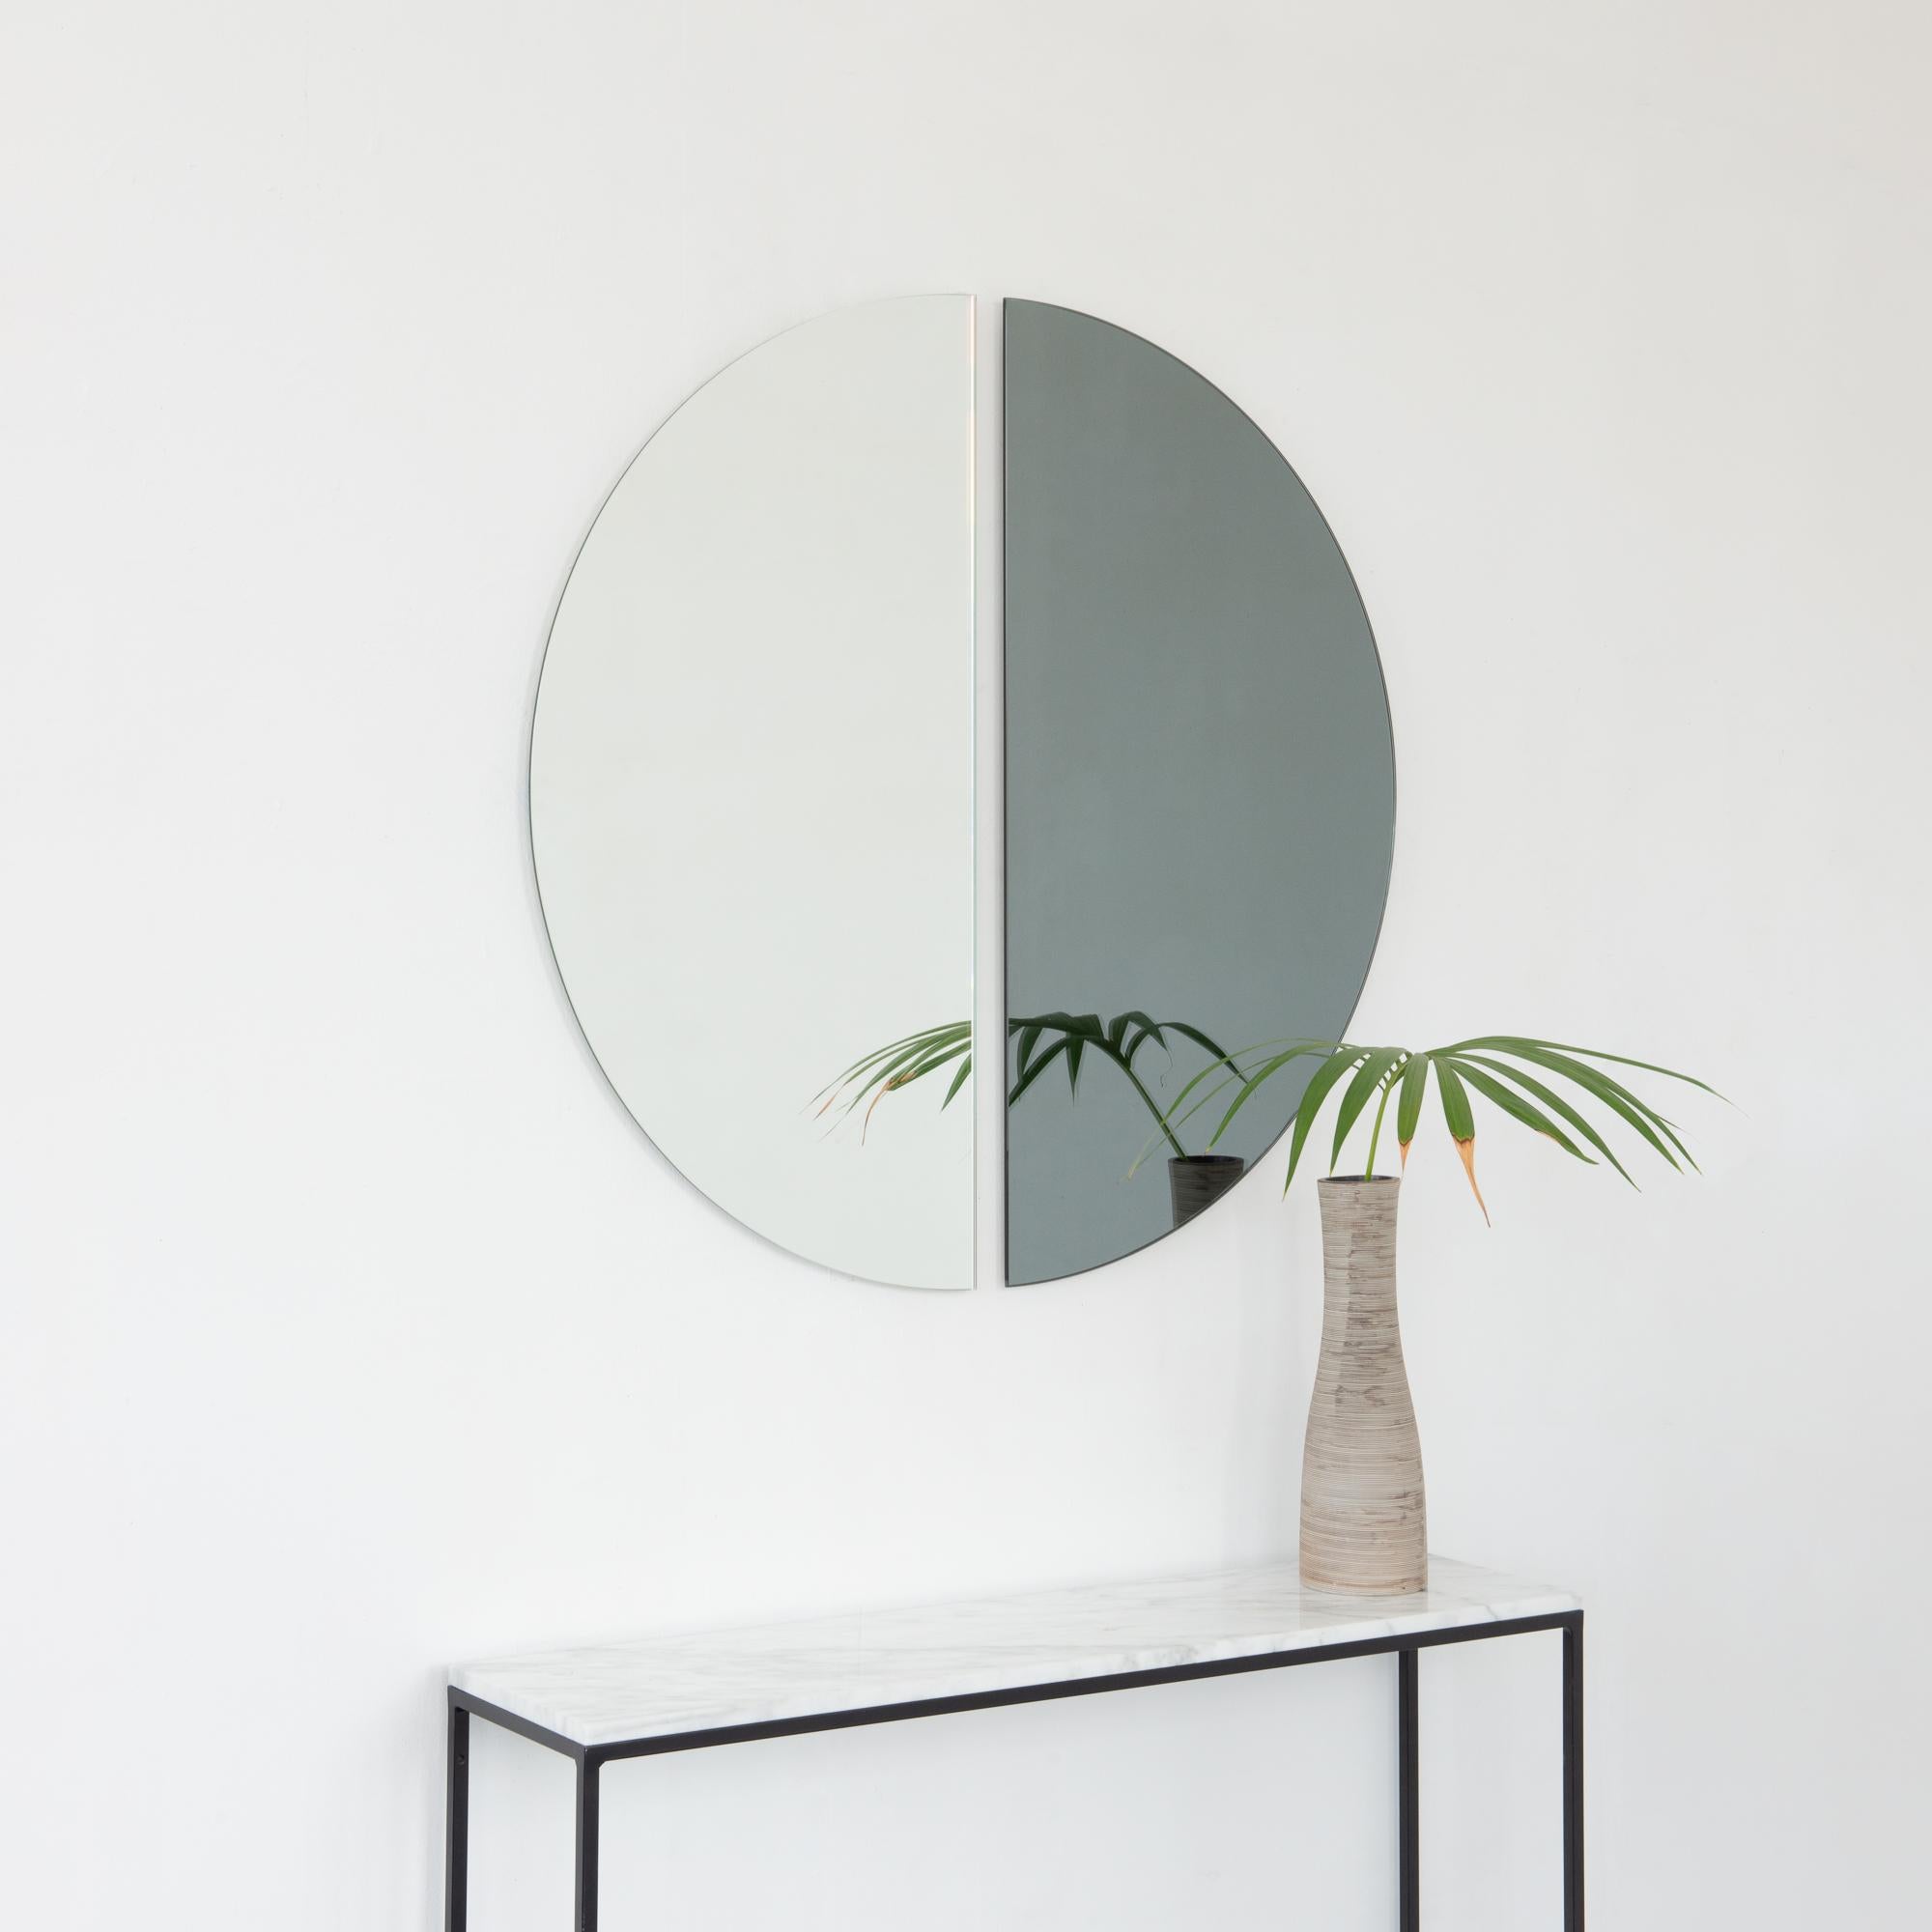 Set of two minimalist half-moon Luna™ standard silver + black tinted frameless mirrors with a floating effect. Fitted with a quality and ingenious hanging system for a flexible installation in 4 different directions. Designed and made in London, UK.